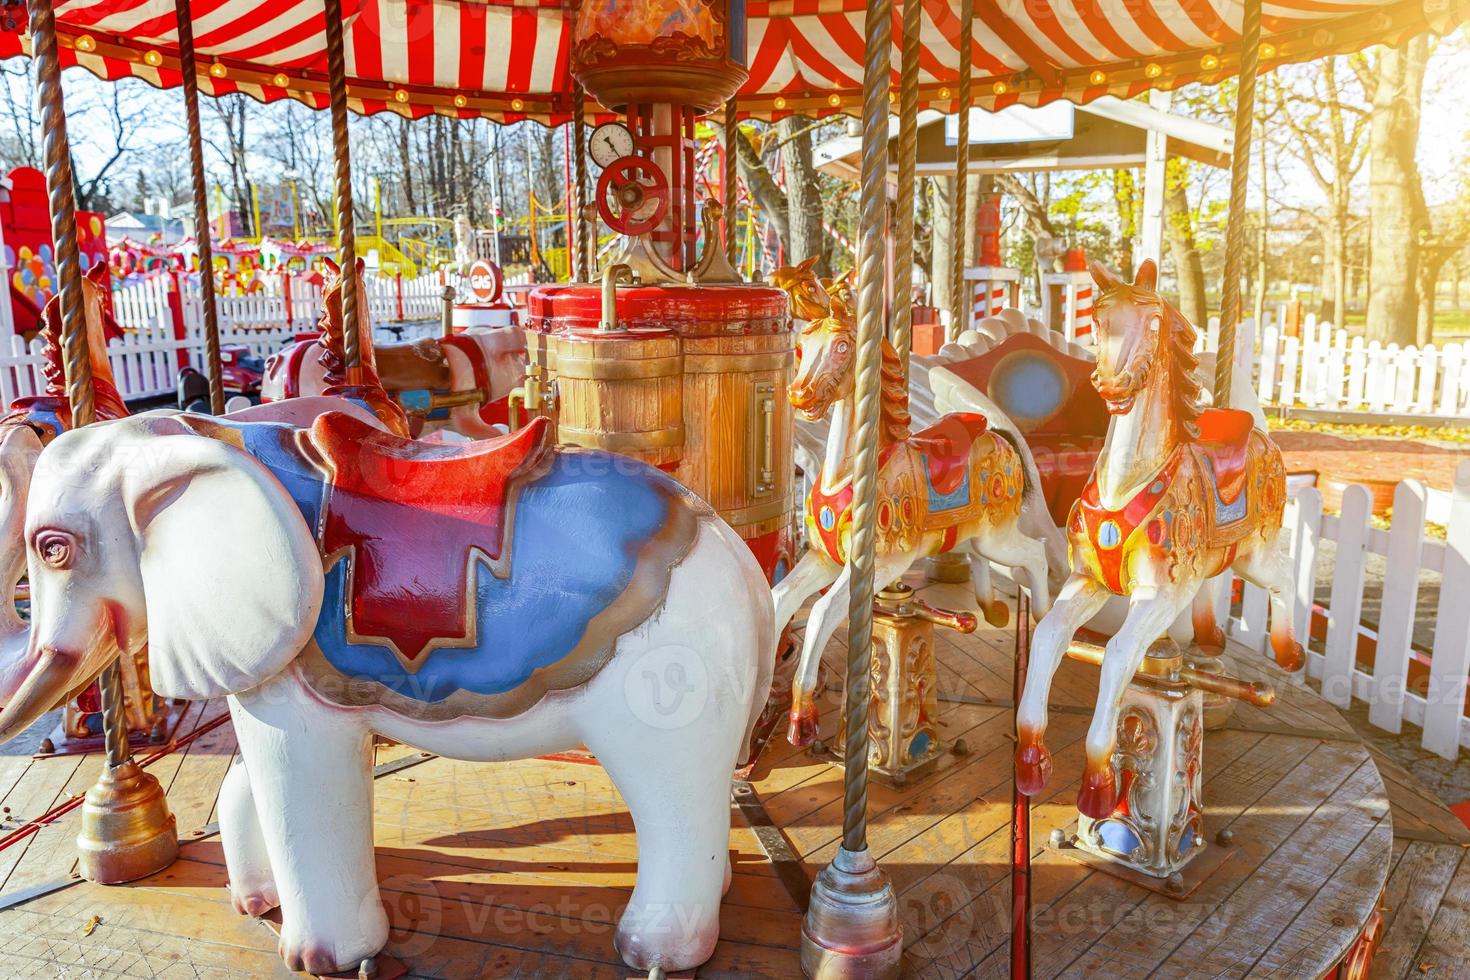 Vintage Merry-Go-Round flying horse carousel in amusement holliday park photo